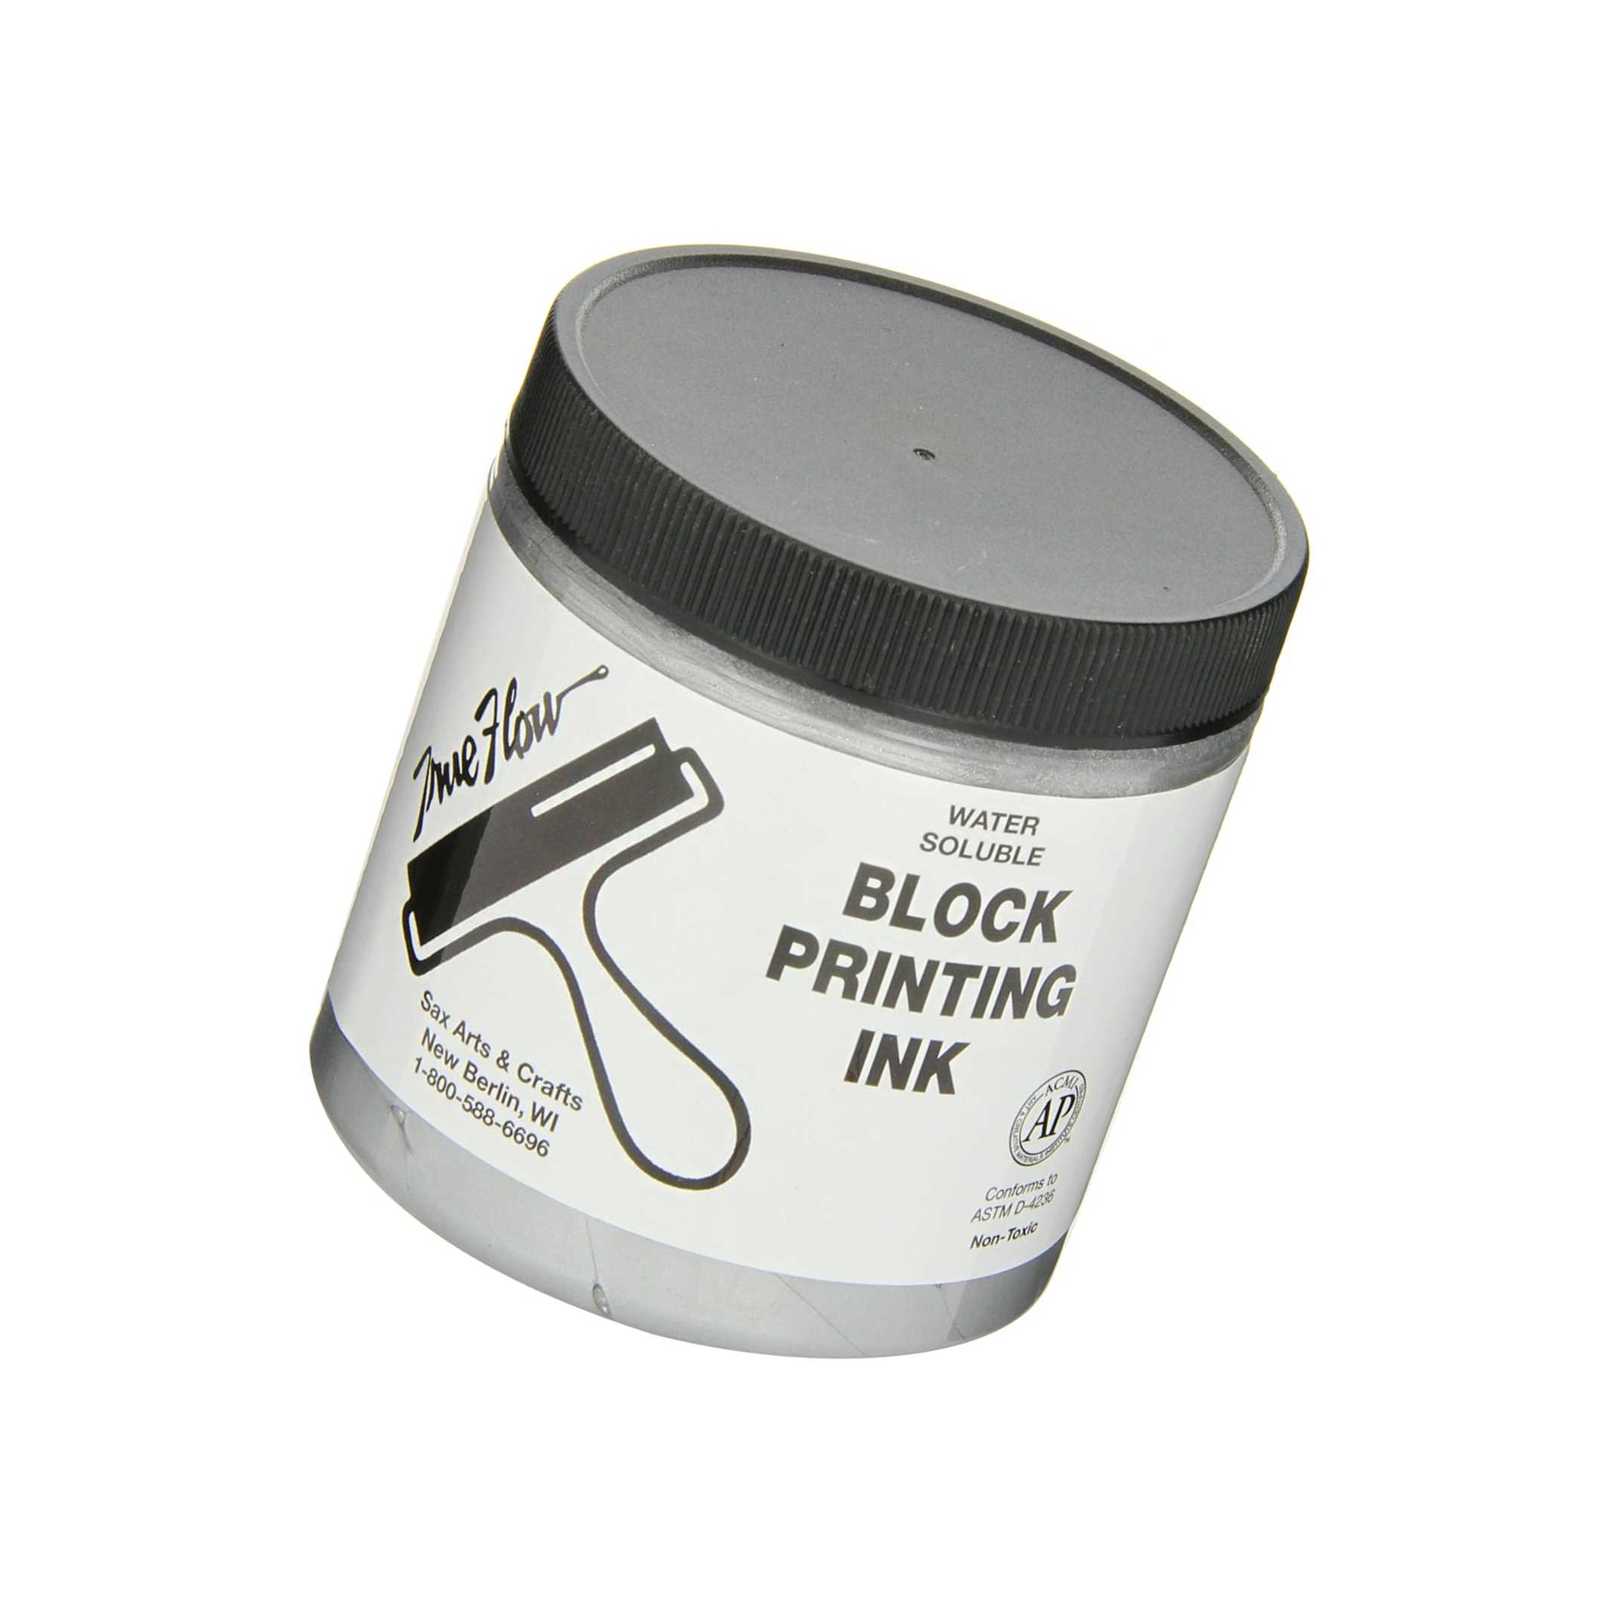 Sax Flow Water Soluble Printing Ink - 8 Ounce Jar - Silver